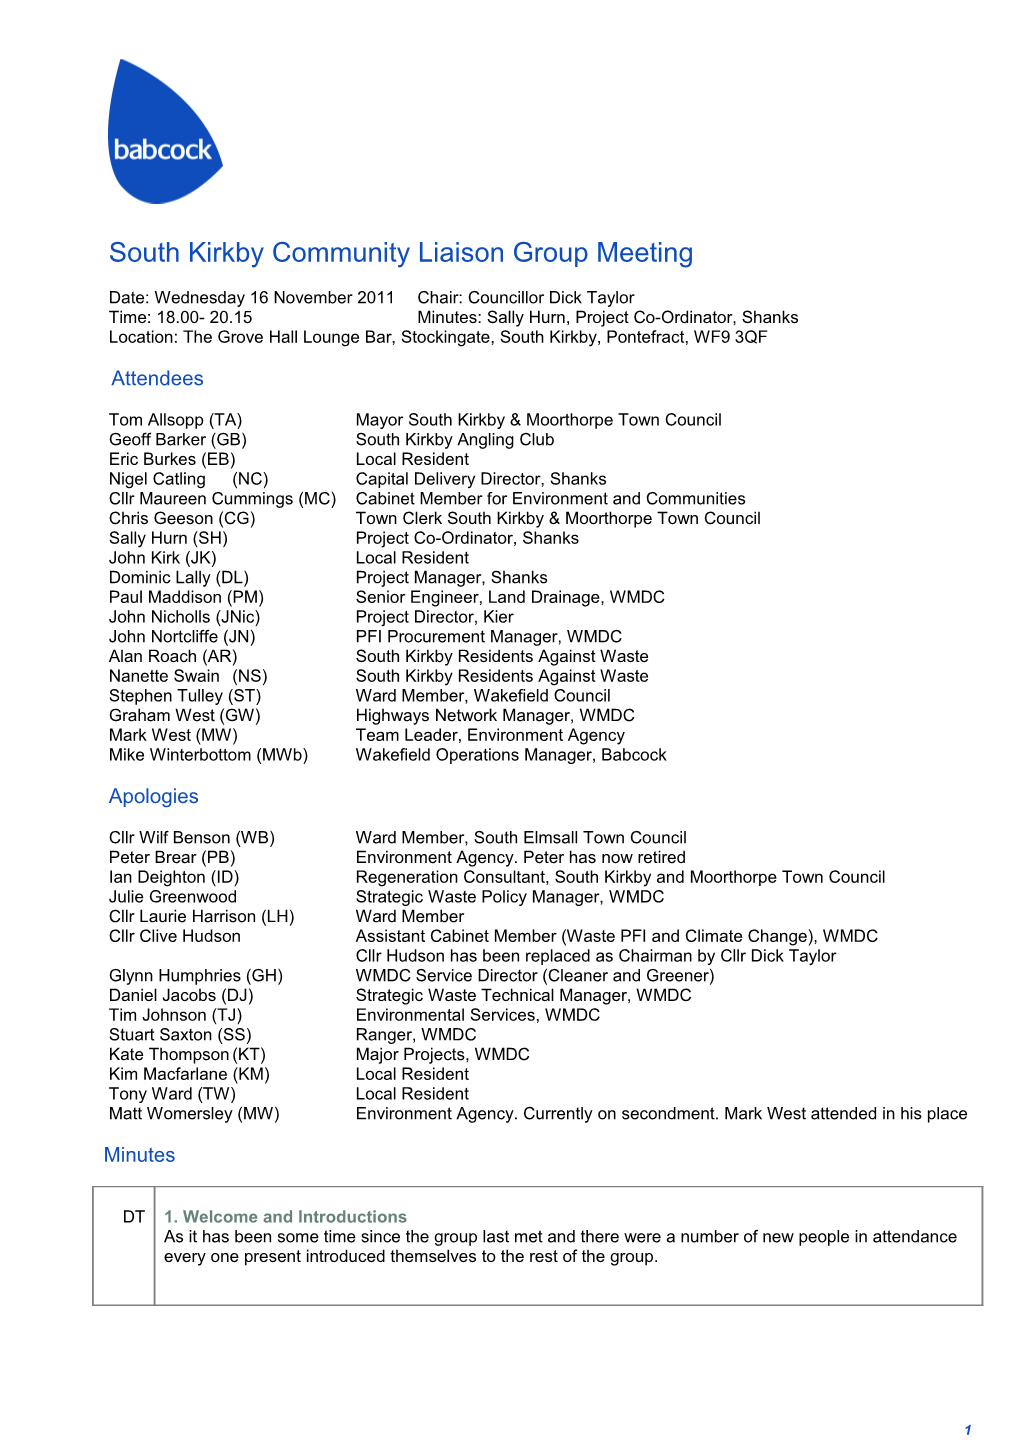 South Kirkby Community Liaison Group Meeting